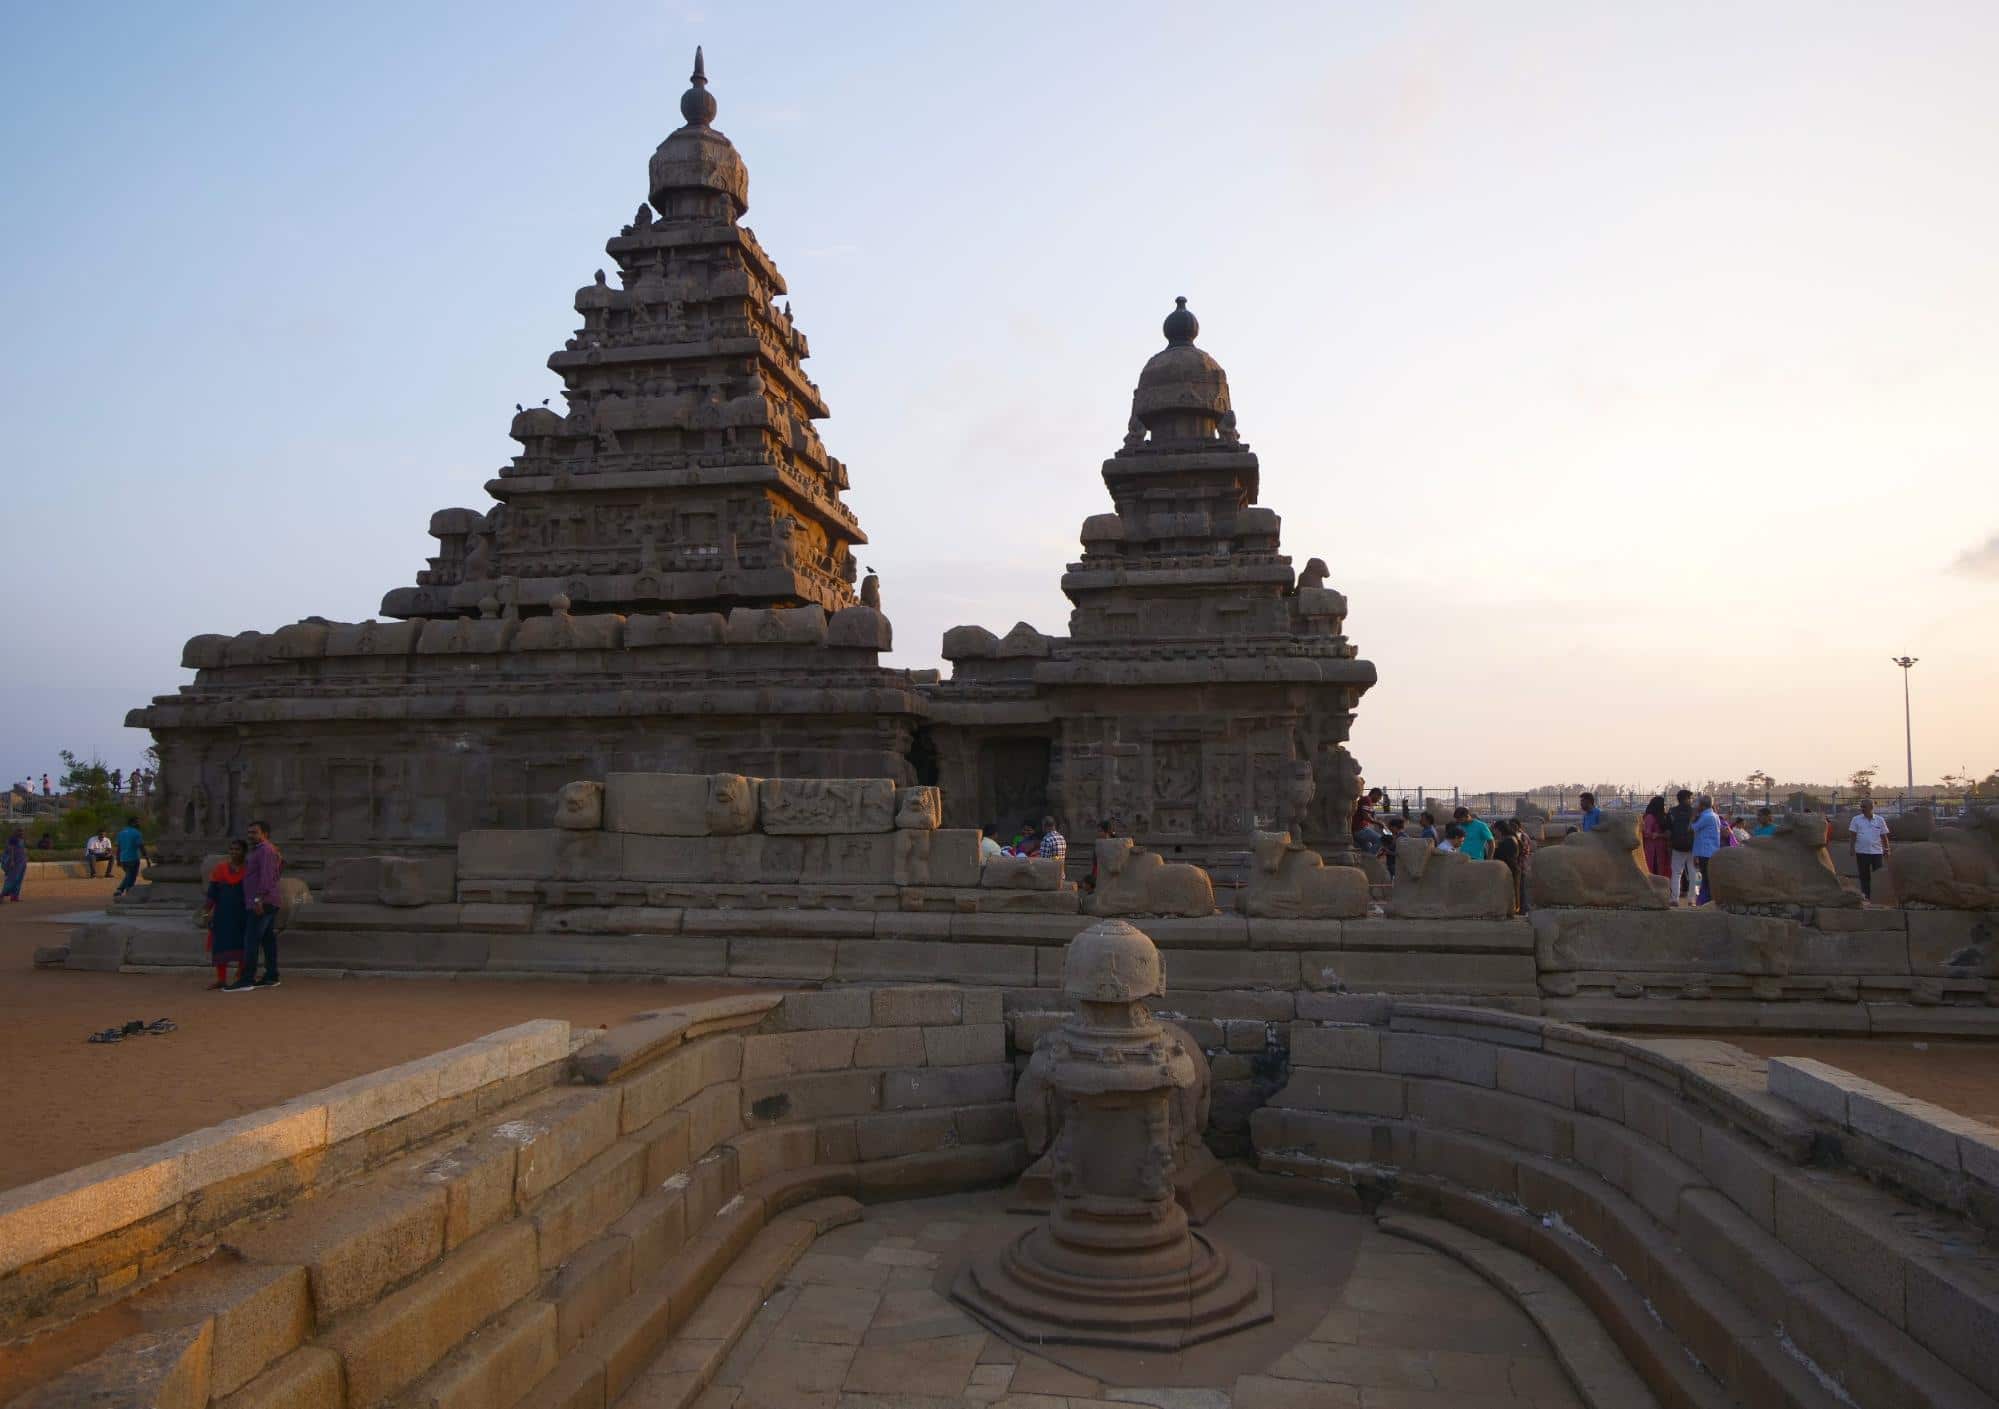 Shore Temple from afar